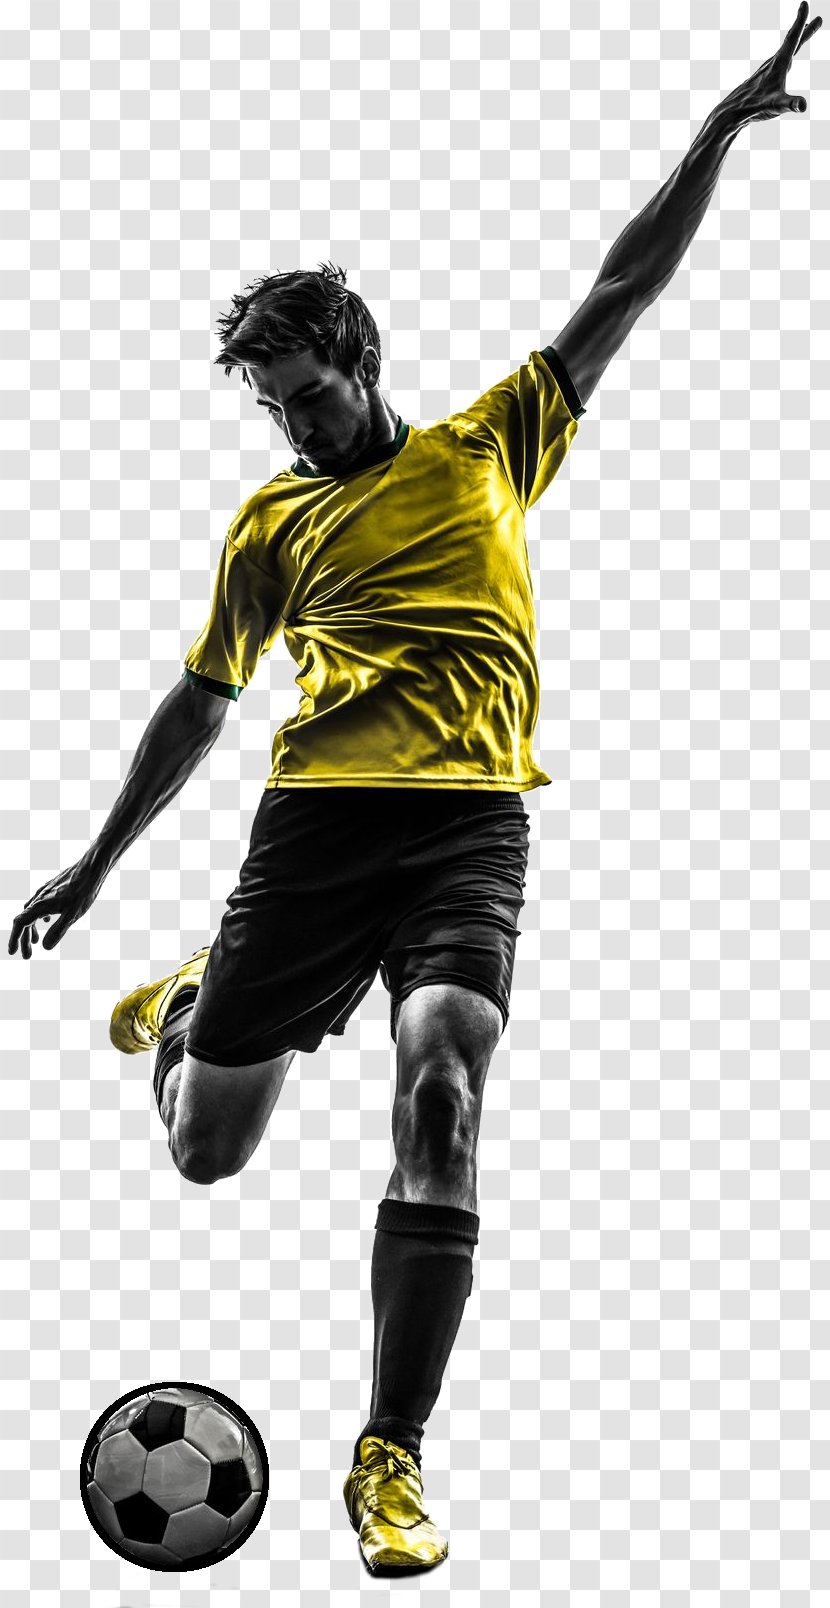 2014 FIFA World Cup Five-a-side Football Player Jersey - Sportswear - Soccer Silhouette Shooting Transparent PNG